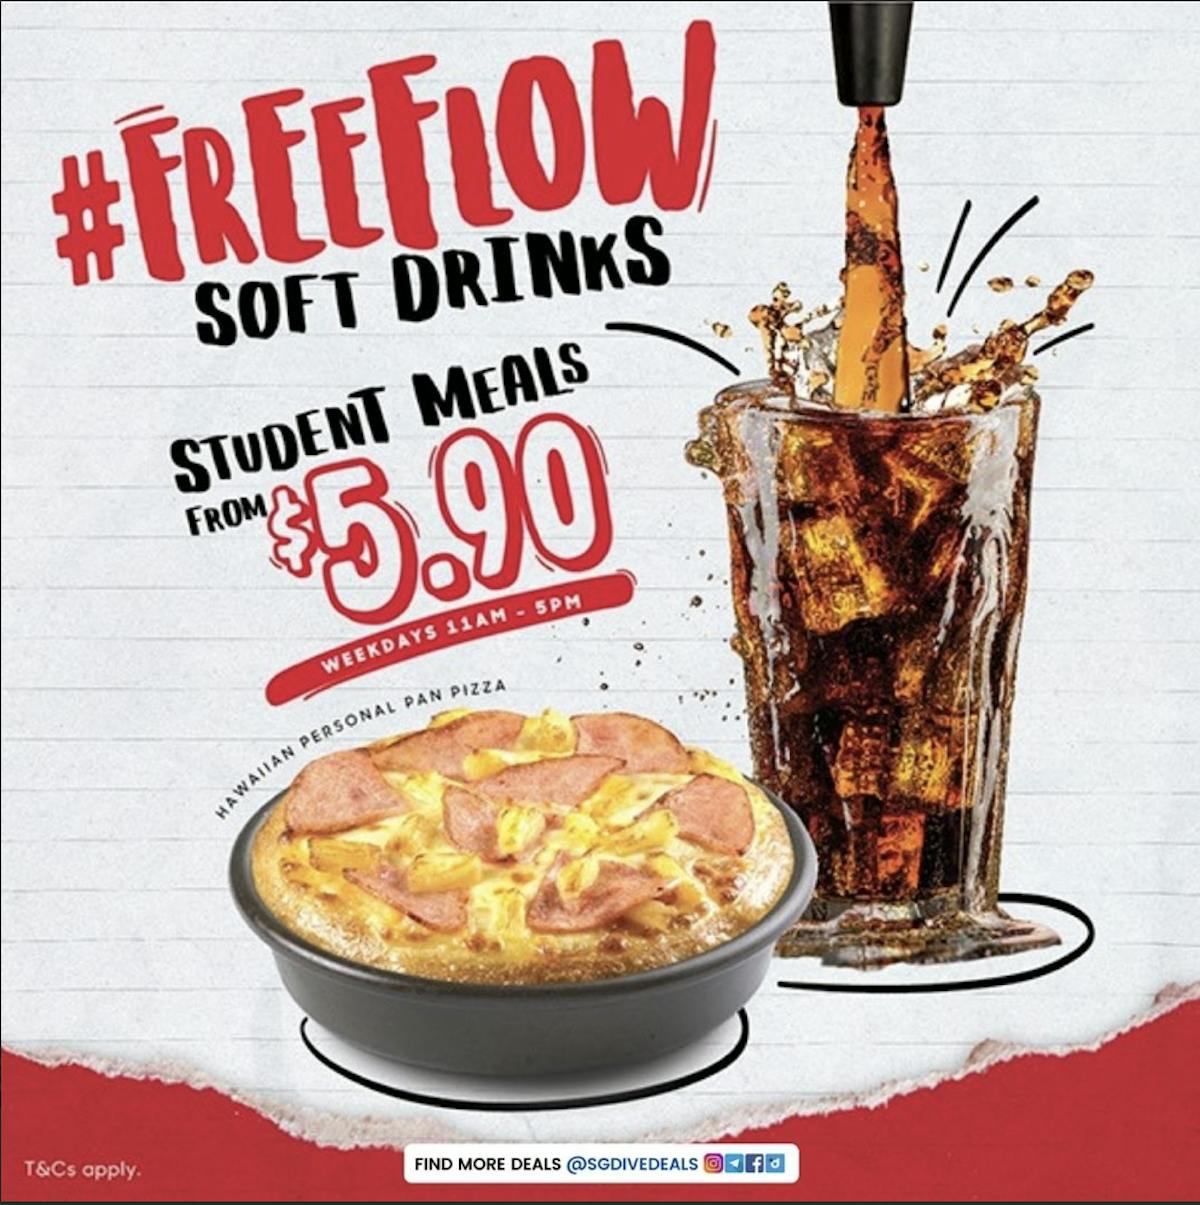 student meal promotion from $5.90++ with free-flow drinks